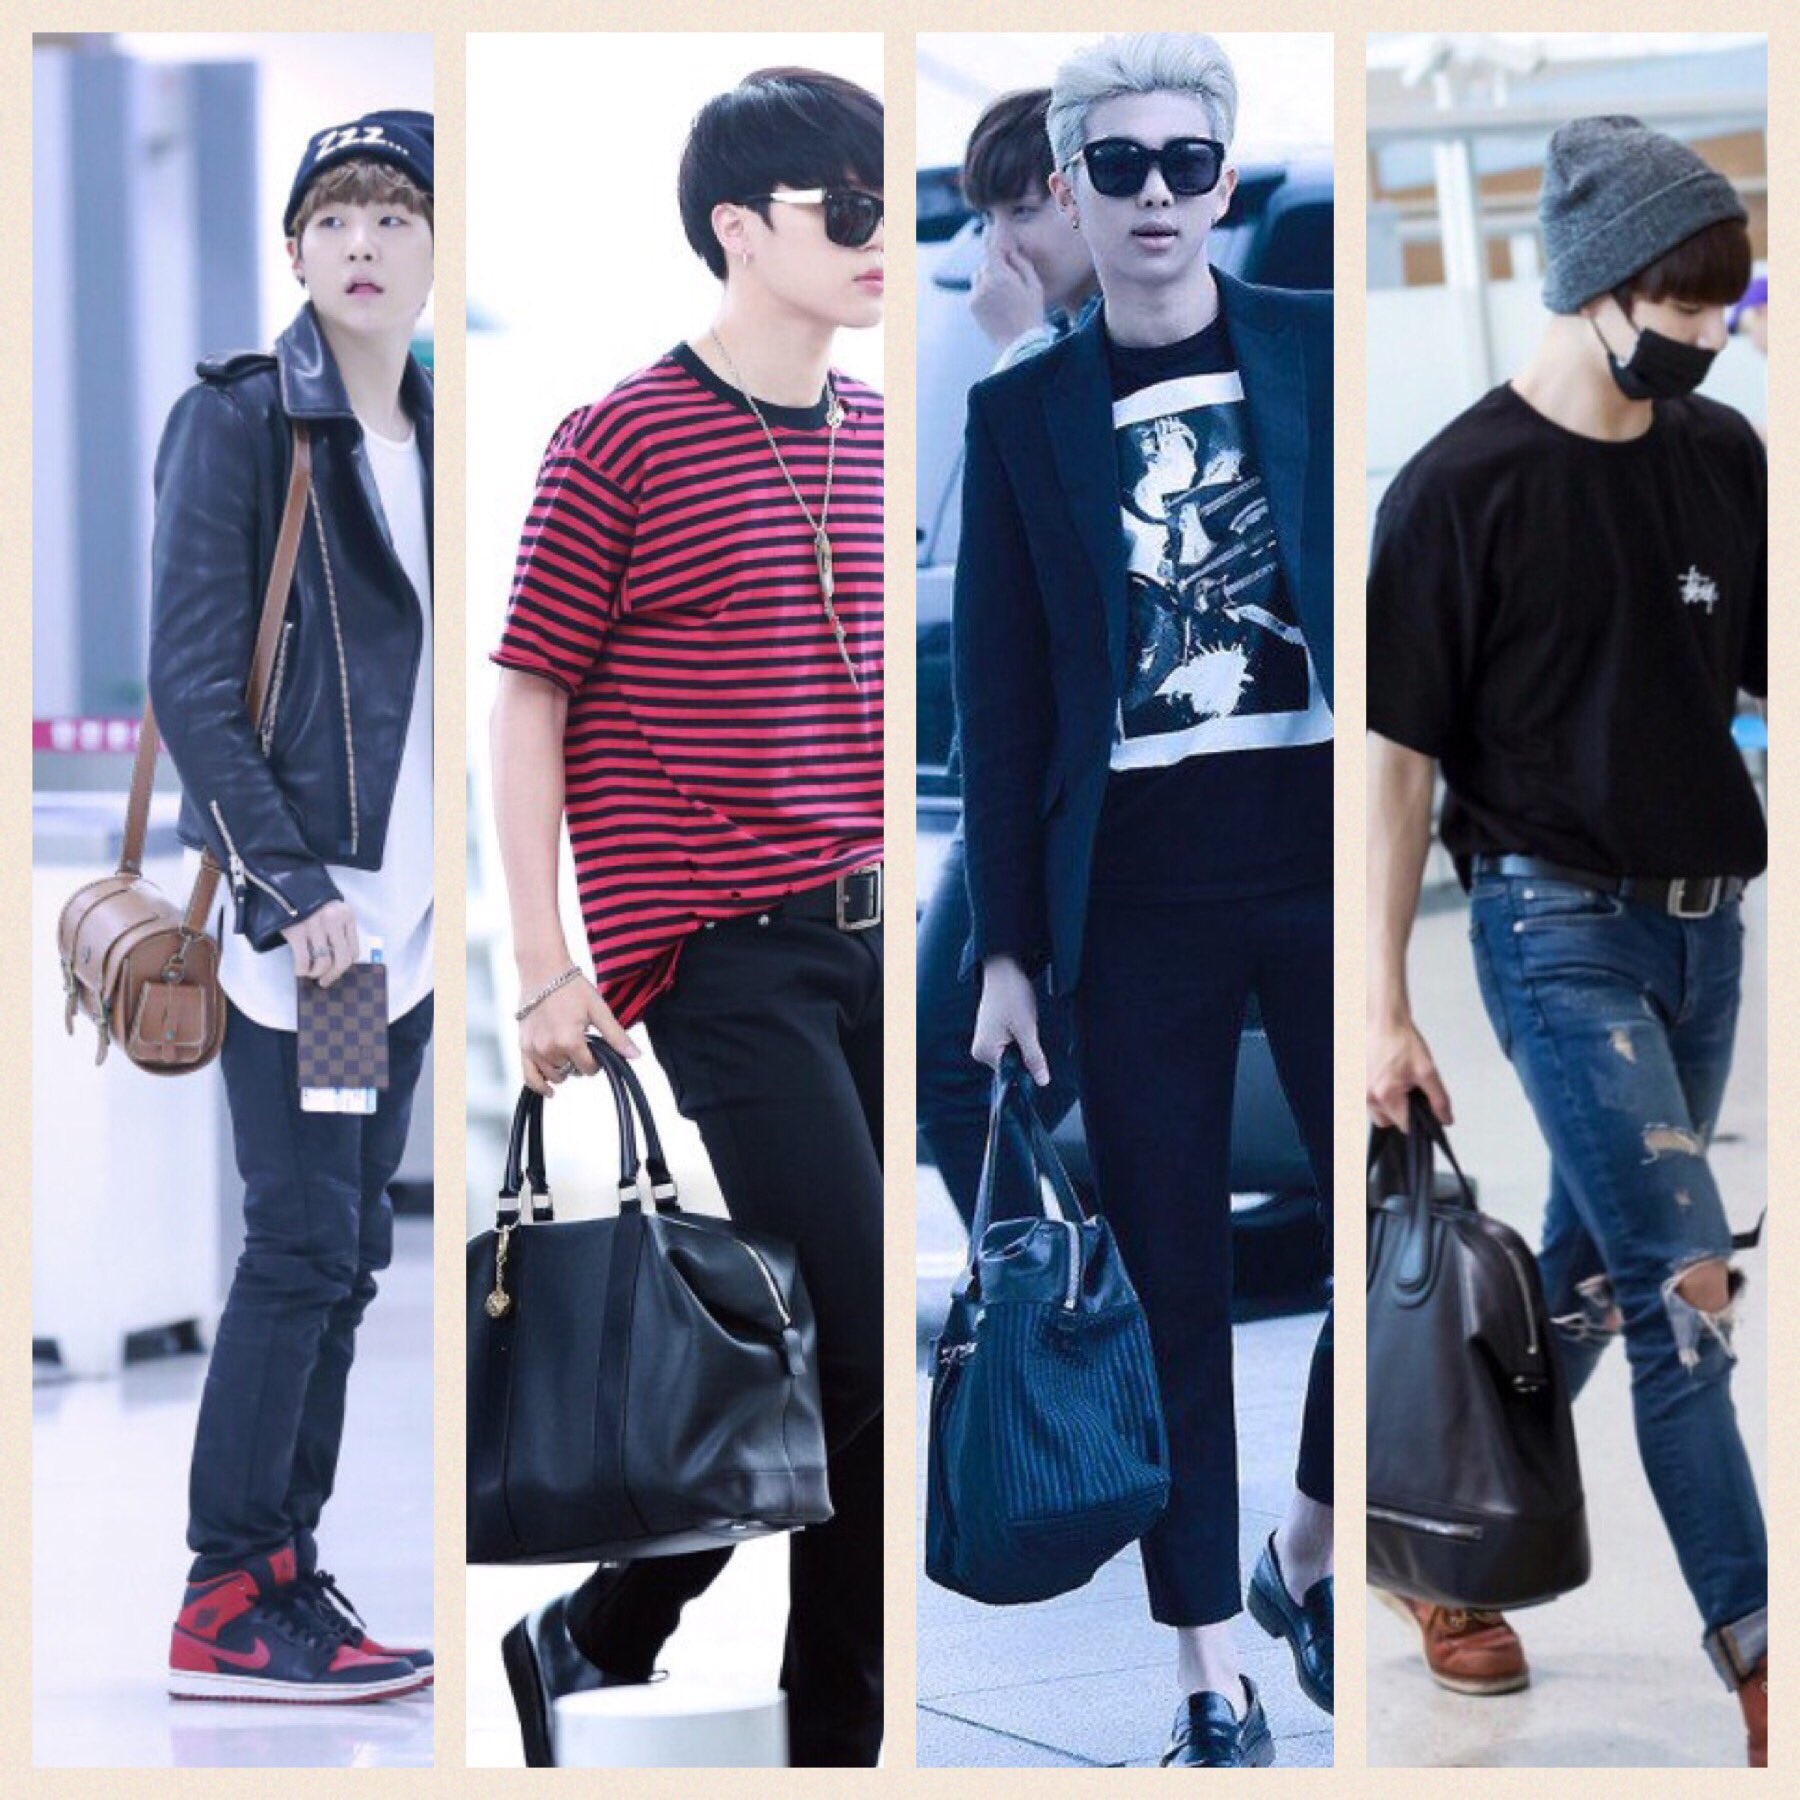 Chrys on X: Which BTS member wore the man bag best? #btsfashion